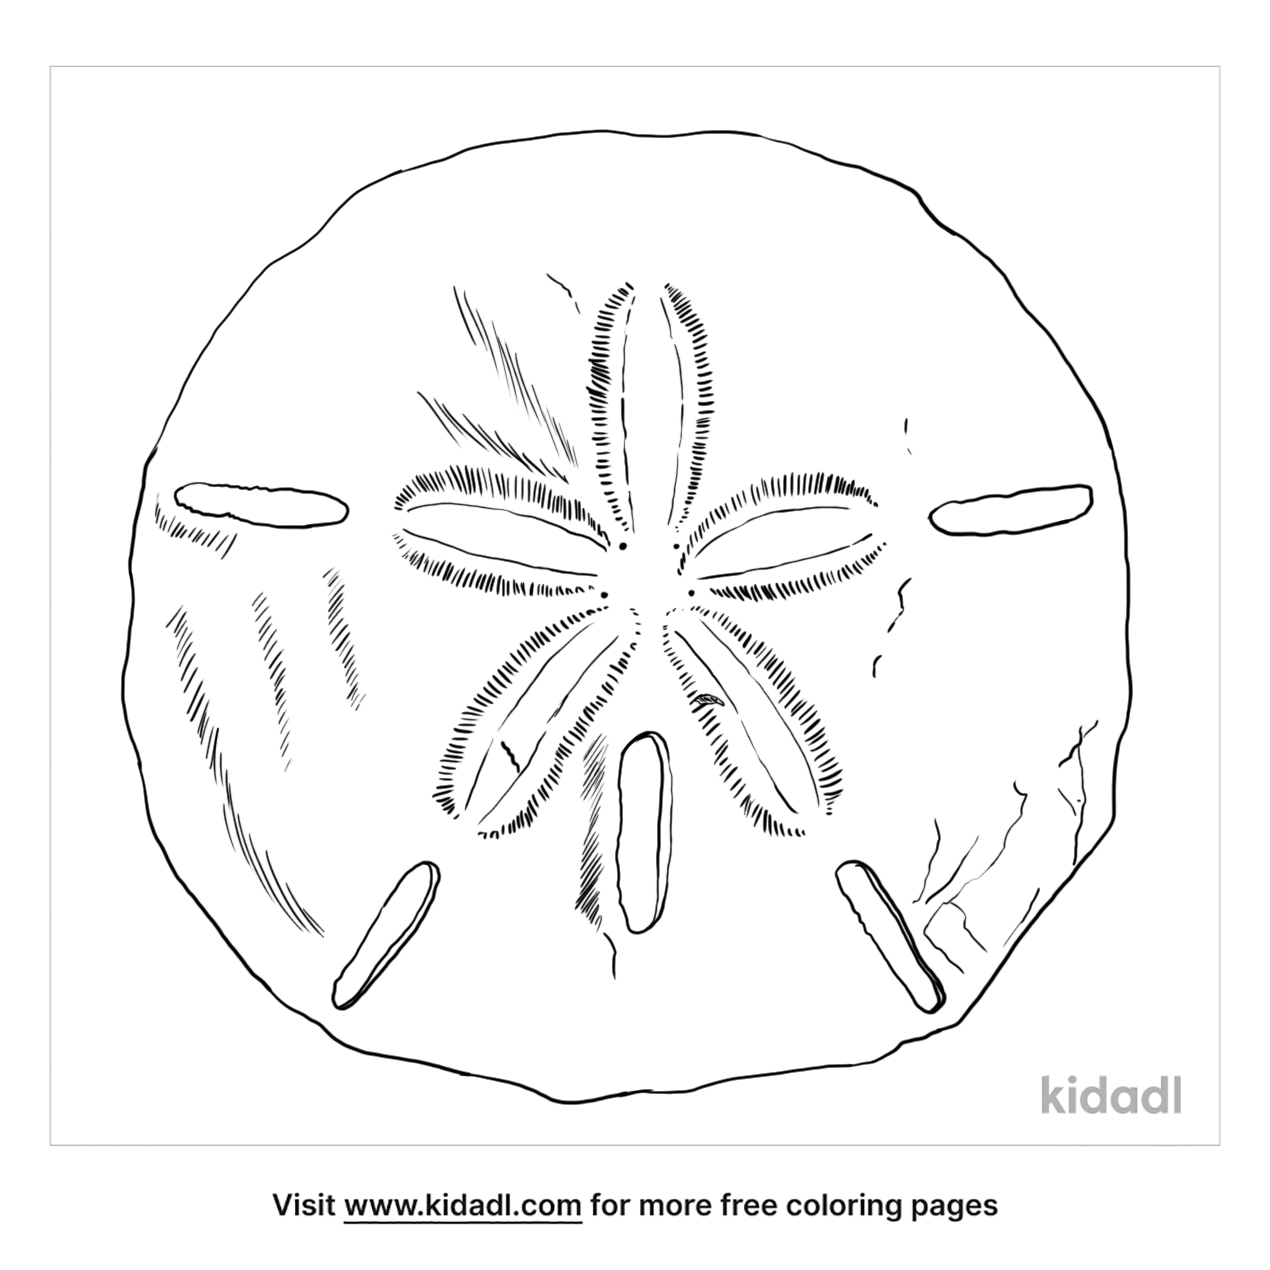 Sanddollar Coloring Pages | Free Animals Coloring Pages | Kidadl